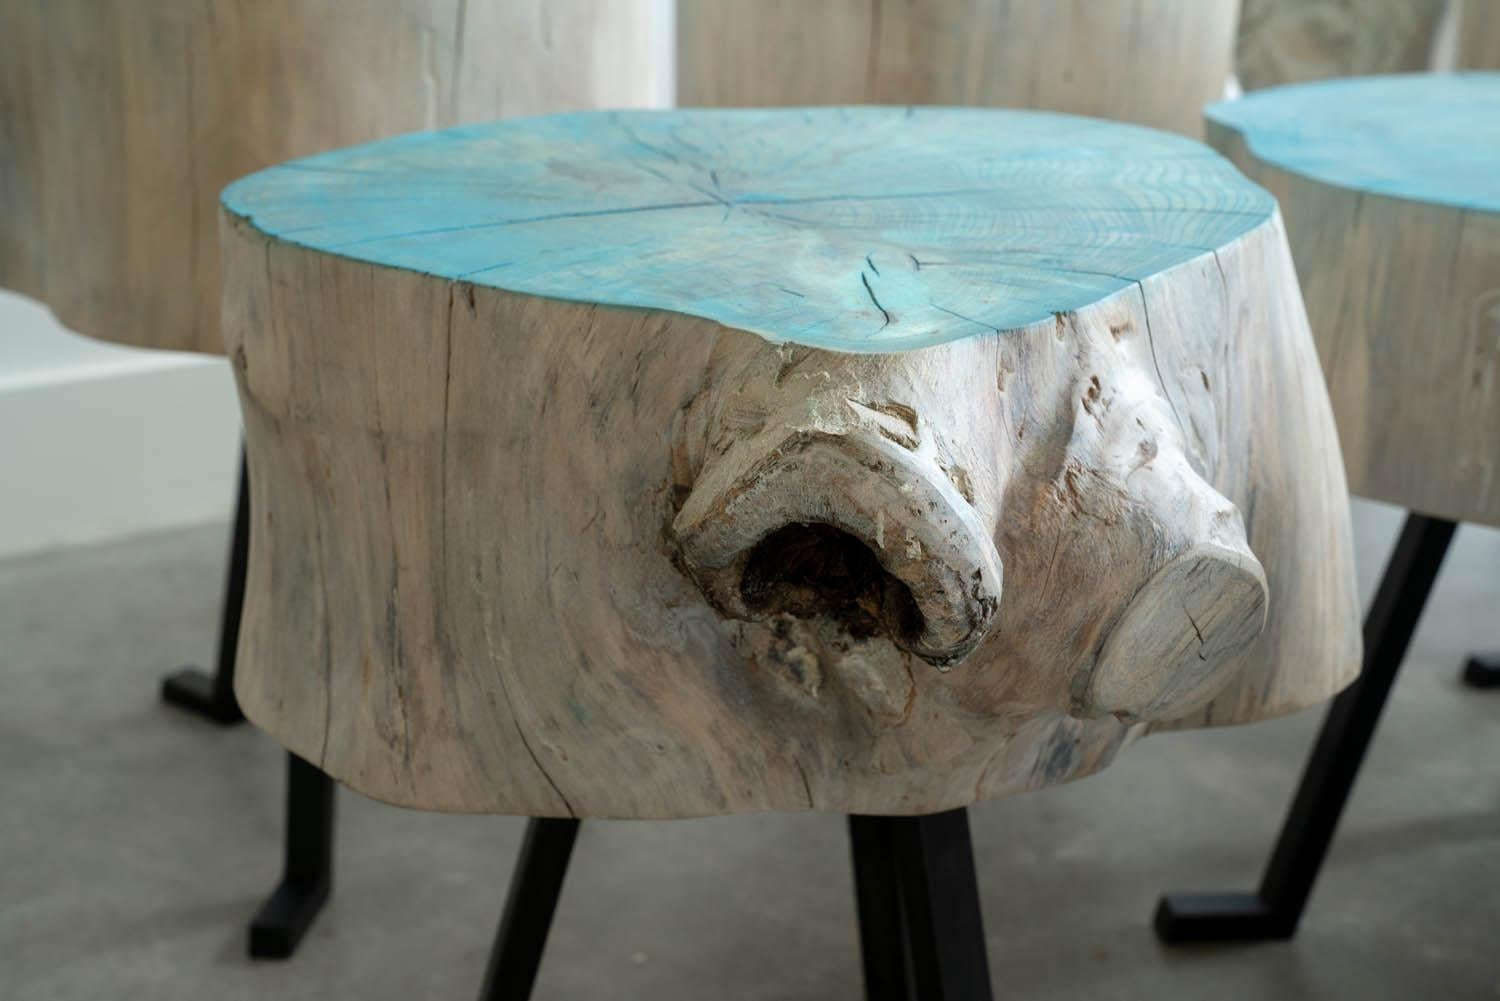 This Live Edge Round Side Table is an occasional table, a coffee table, or a side table. We call it the Sputnik Table. It is certainly irregular and that’s why you’ll love it. The three metal legs attached to live edge piece timber evoke the